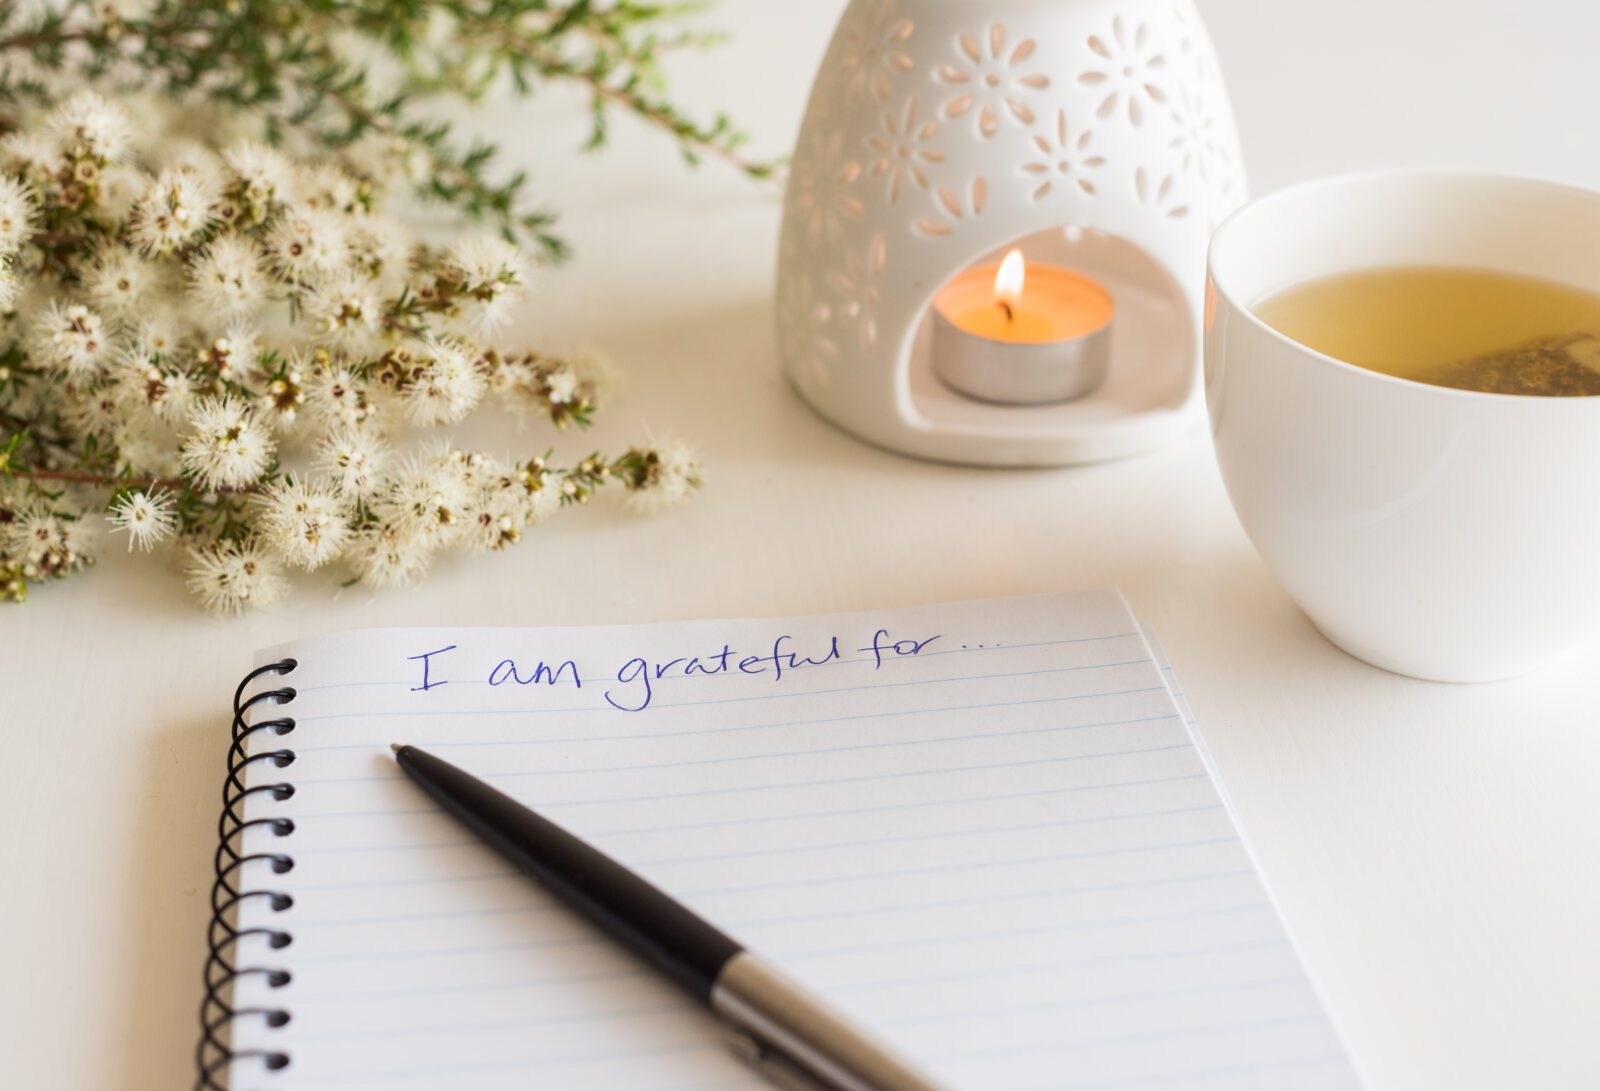 Notebook with "I am grateful for" in handwritten text